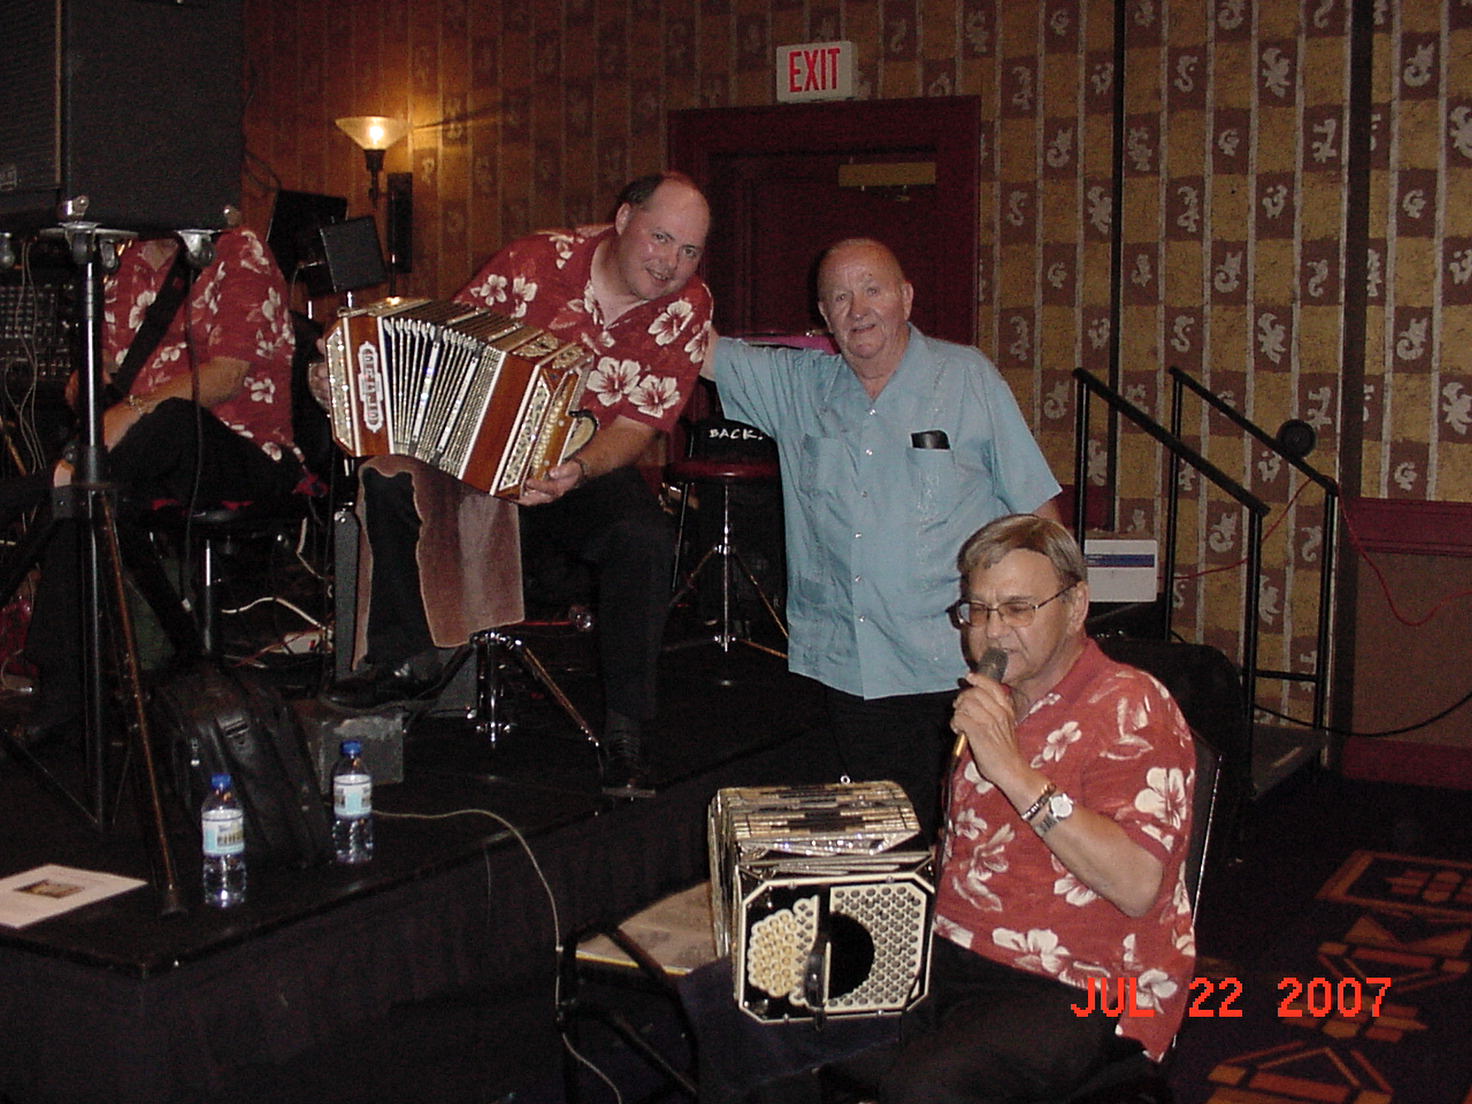 Surrounded by my favorite concertina players; Tom Kula and Casey Homel at the casino in Green Bay, WI 